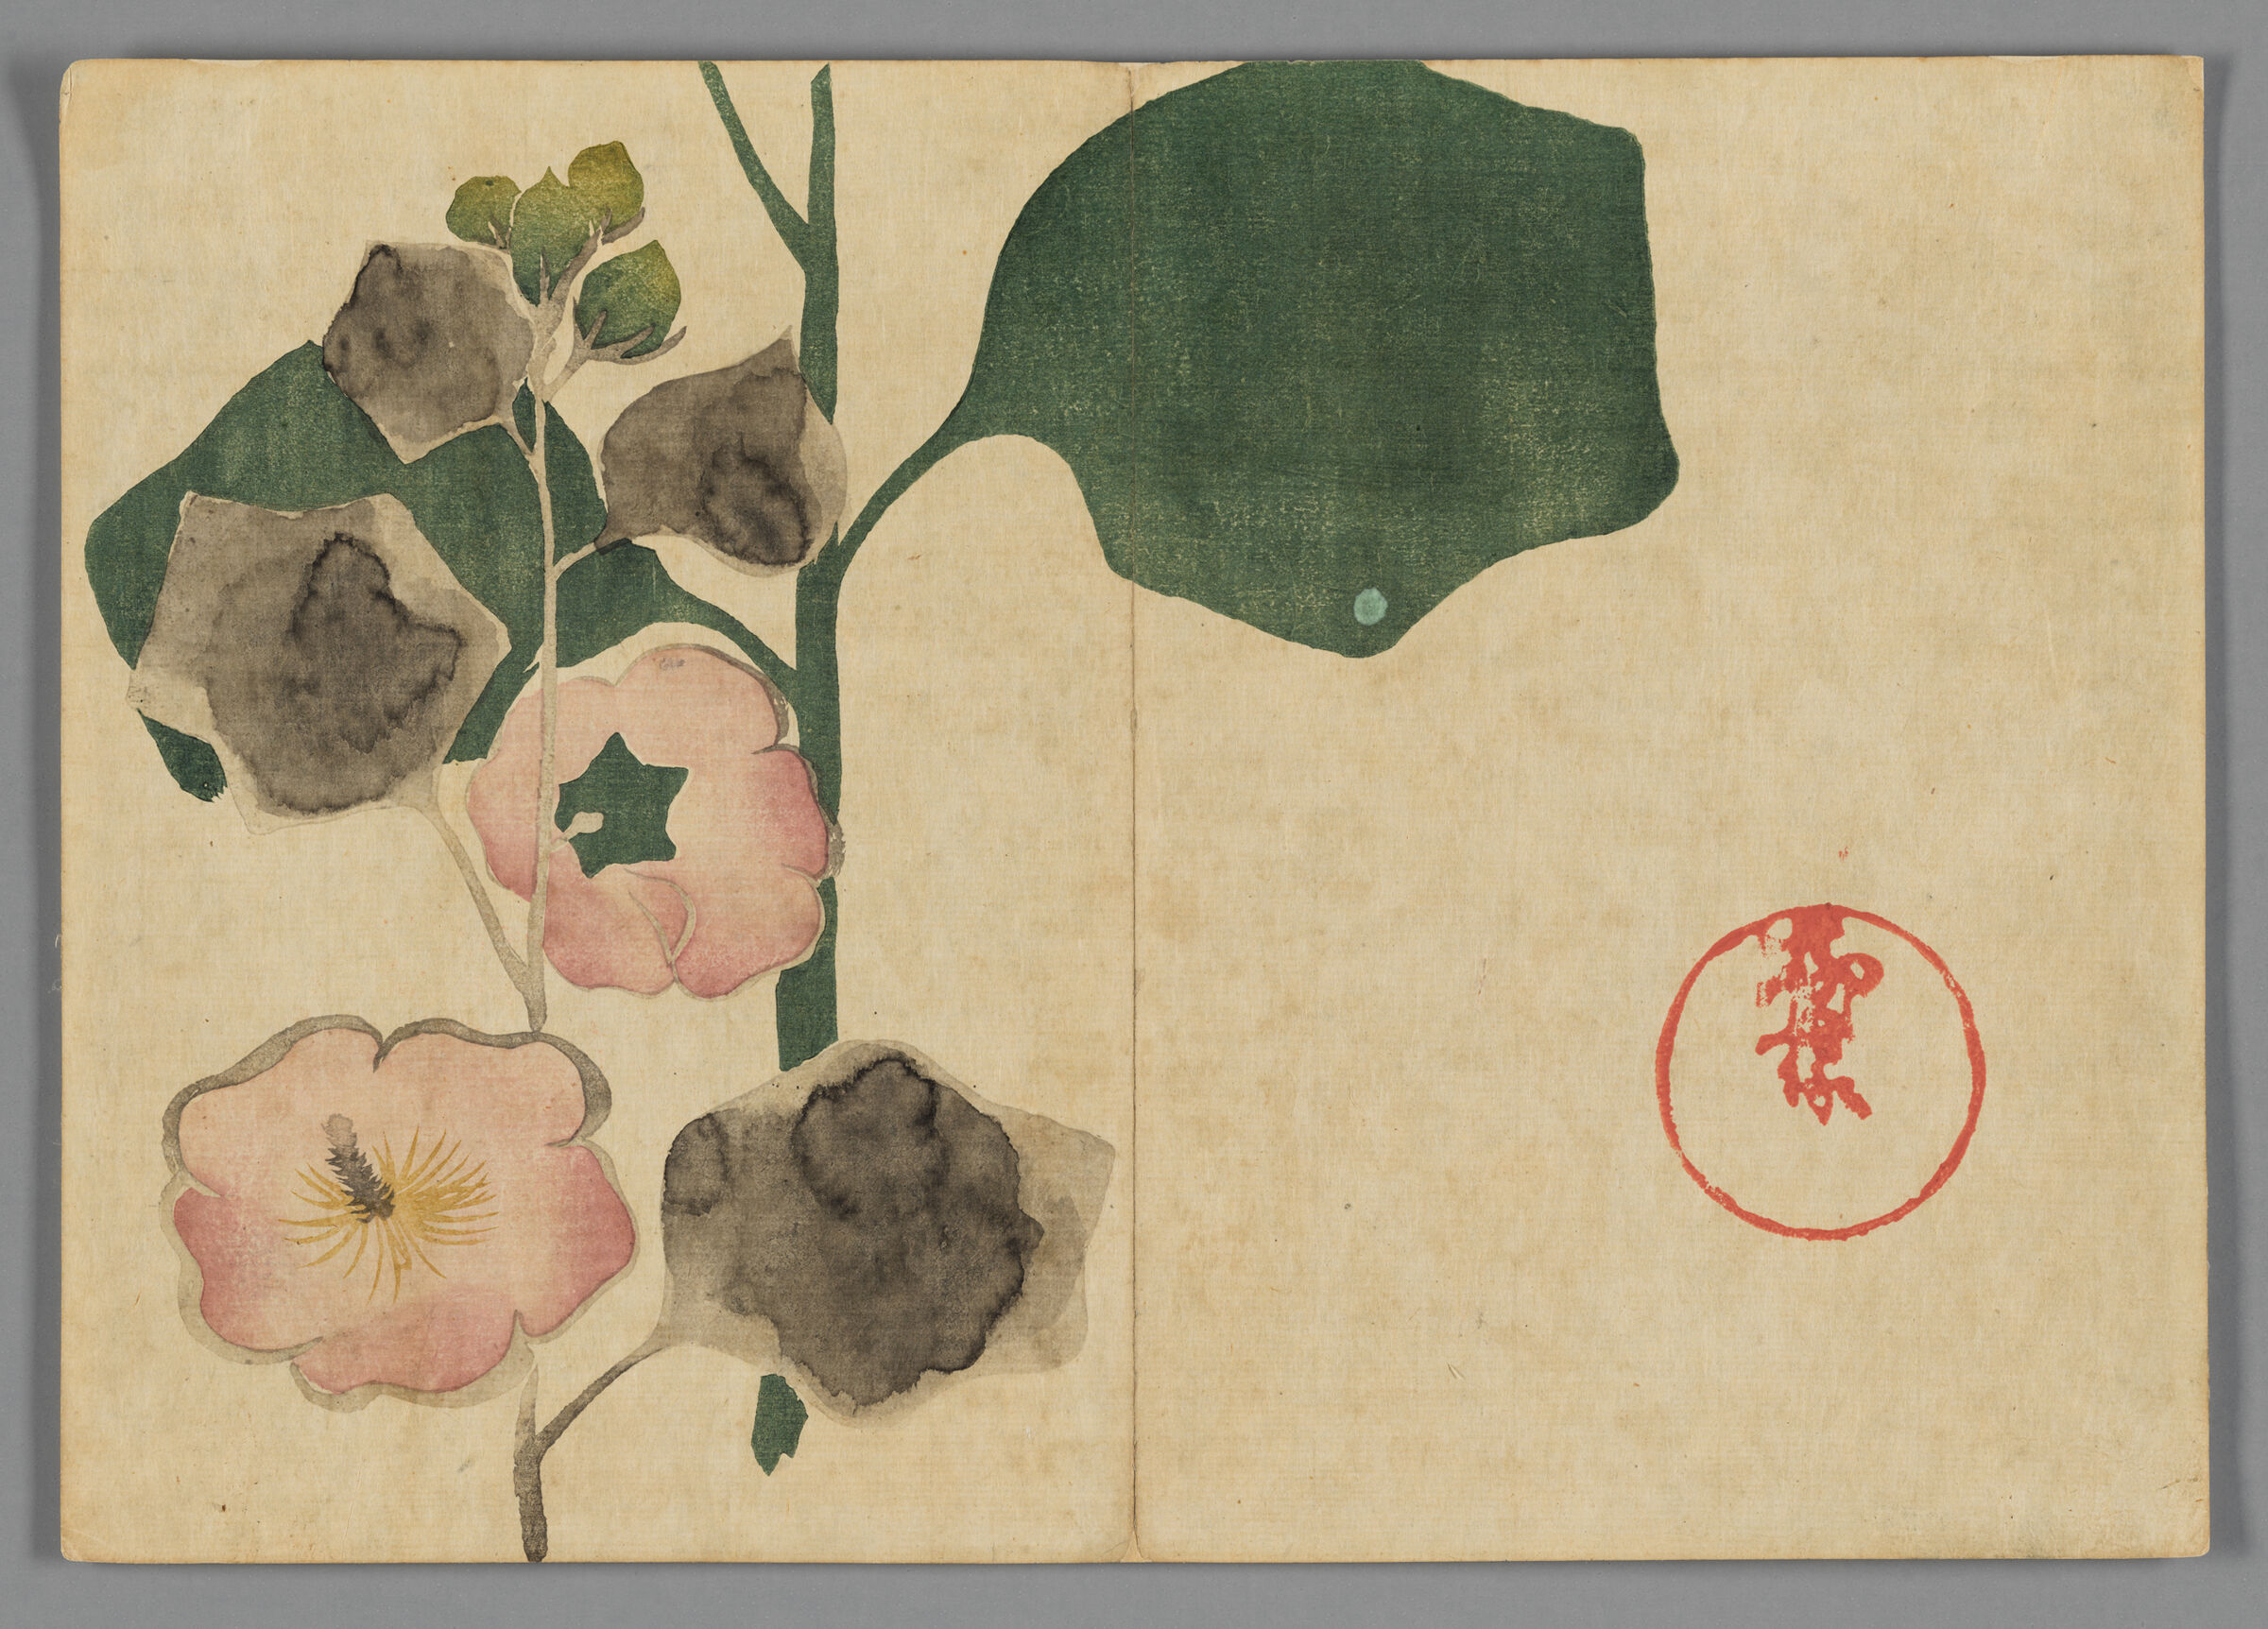 Hollyhock, From The Kōrin Gafu (Kōrin Picture Album)